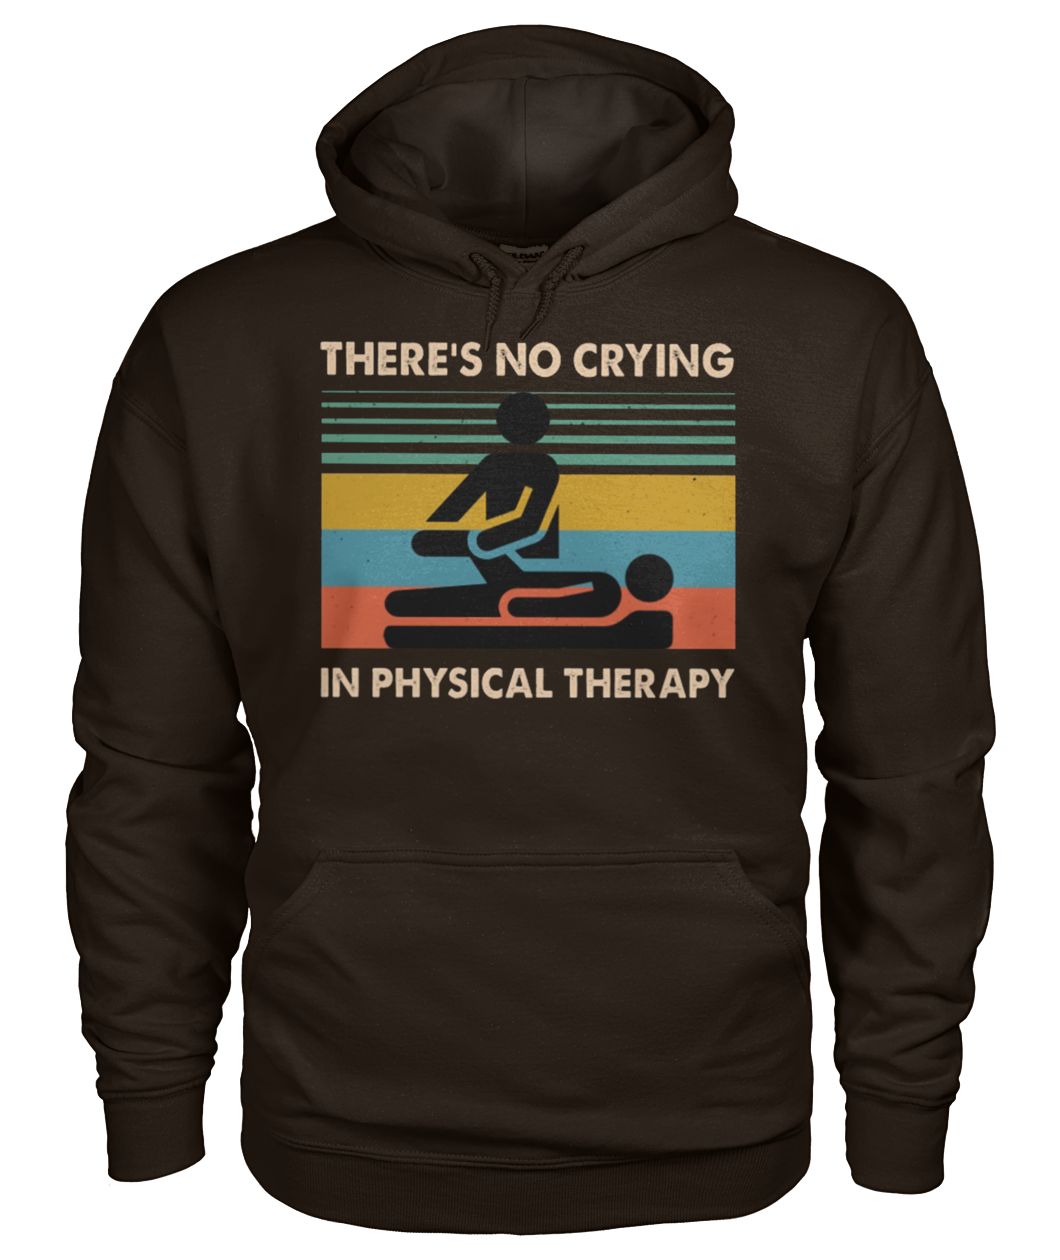 Vintage there's no crying in physical therapy gildan hoodie